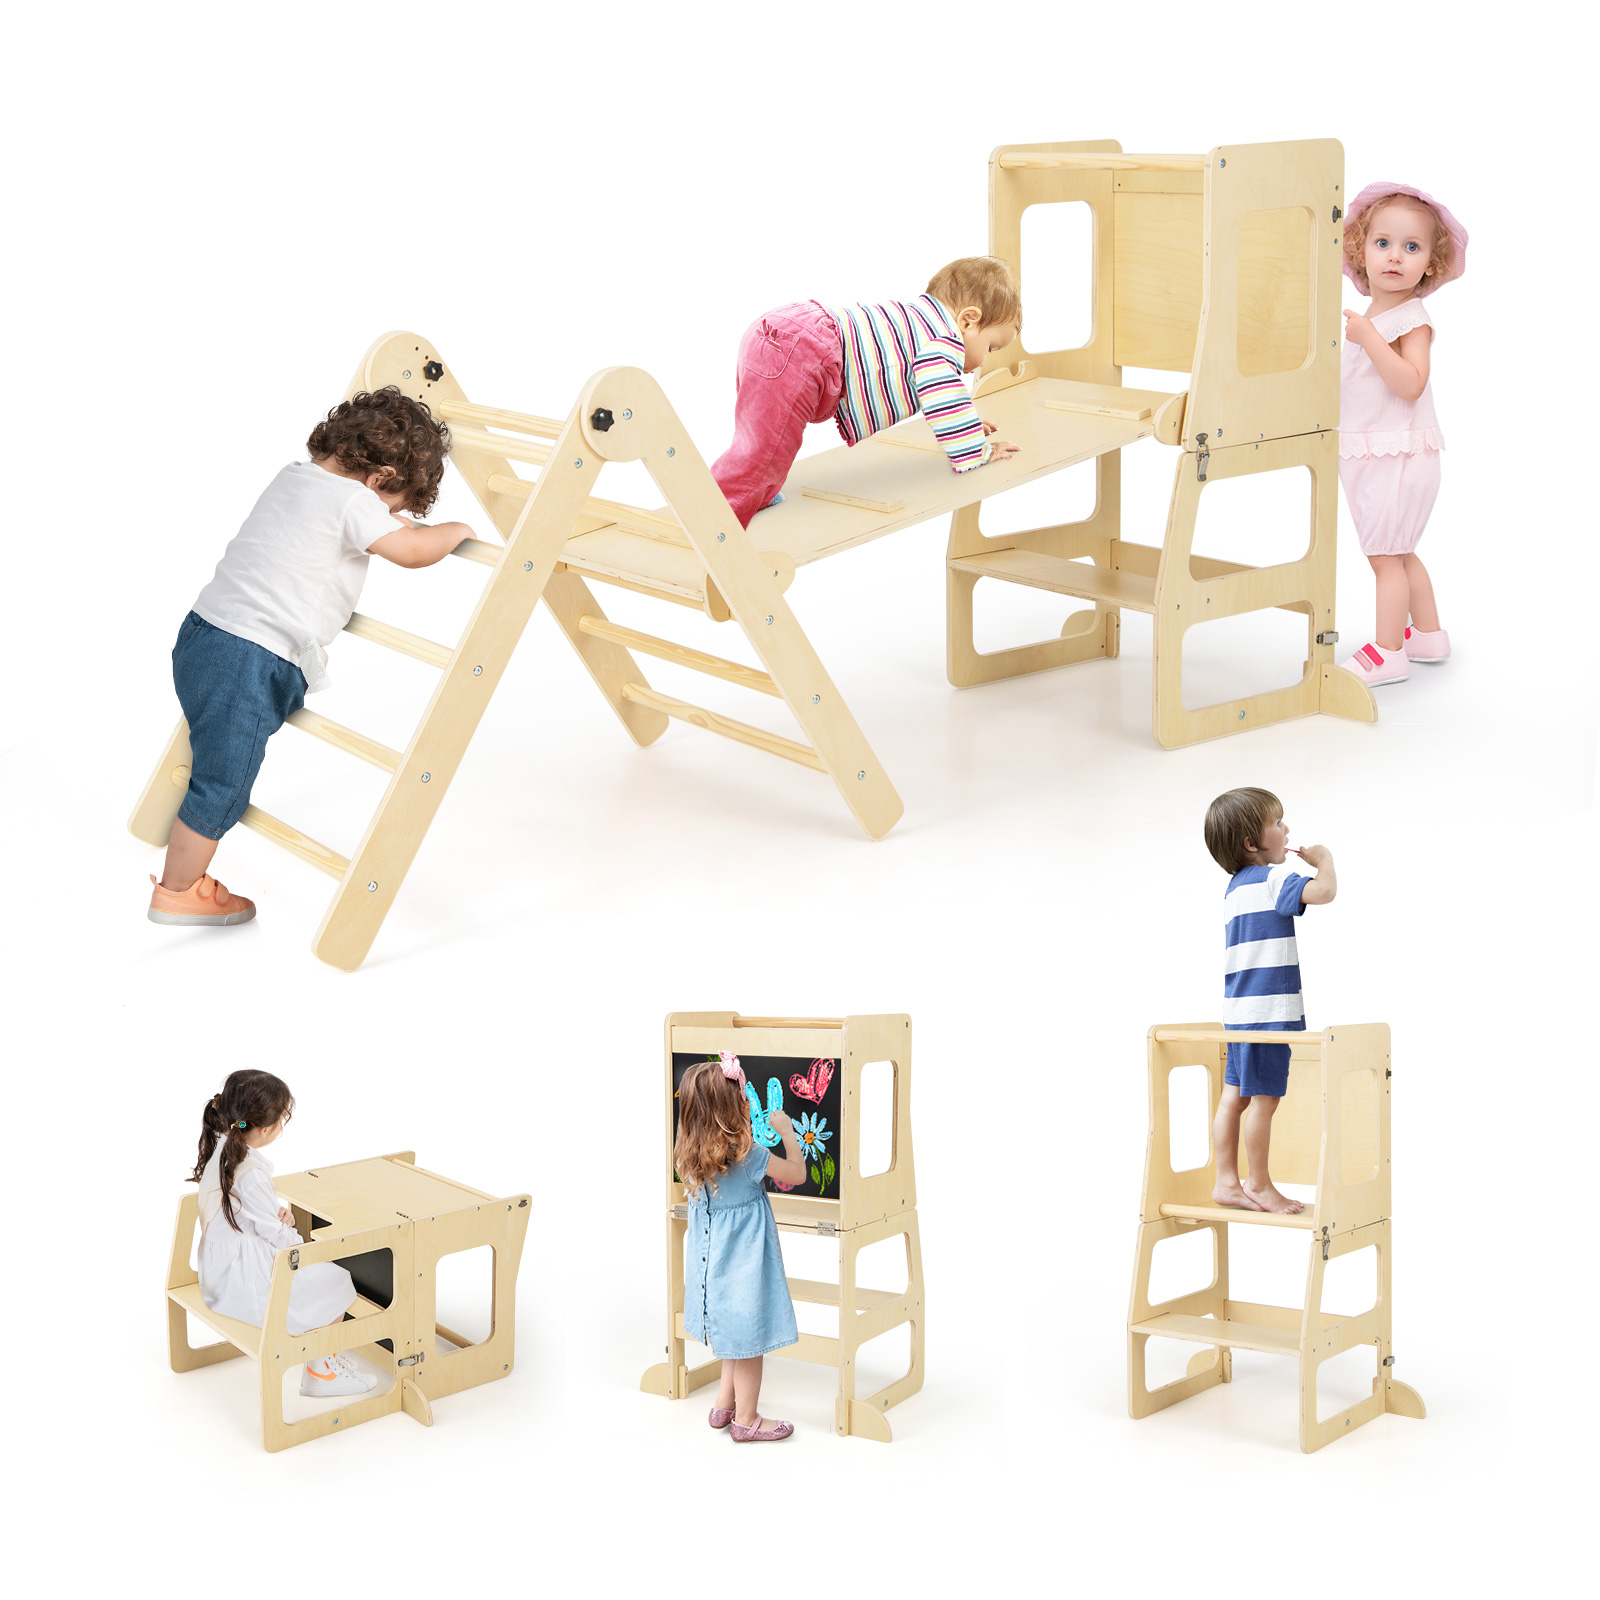 7-in-1 Toddler Climbing Toy Set Folding with Step Stool Ages 3-14 Years Old-Natural